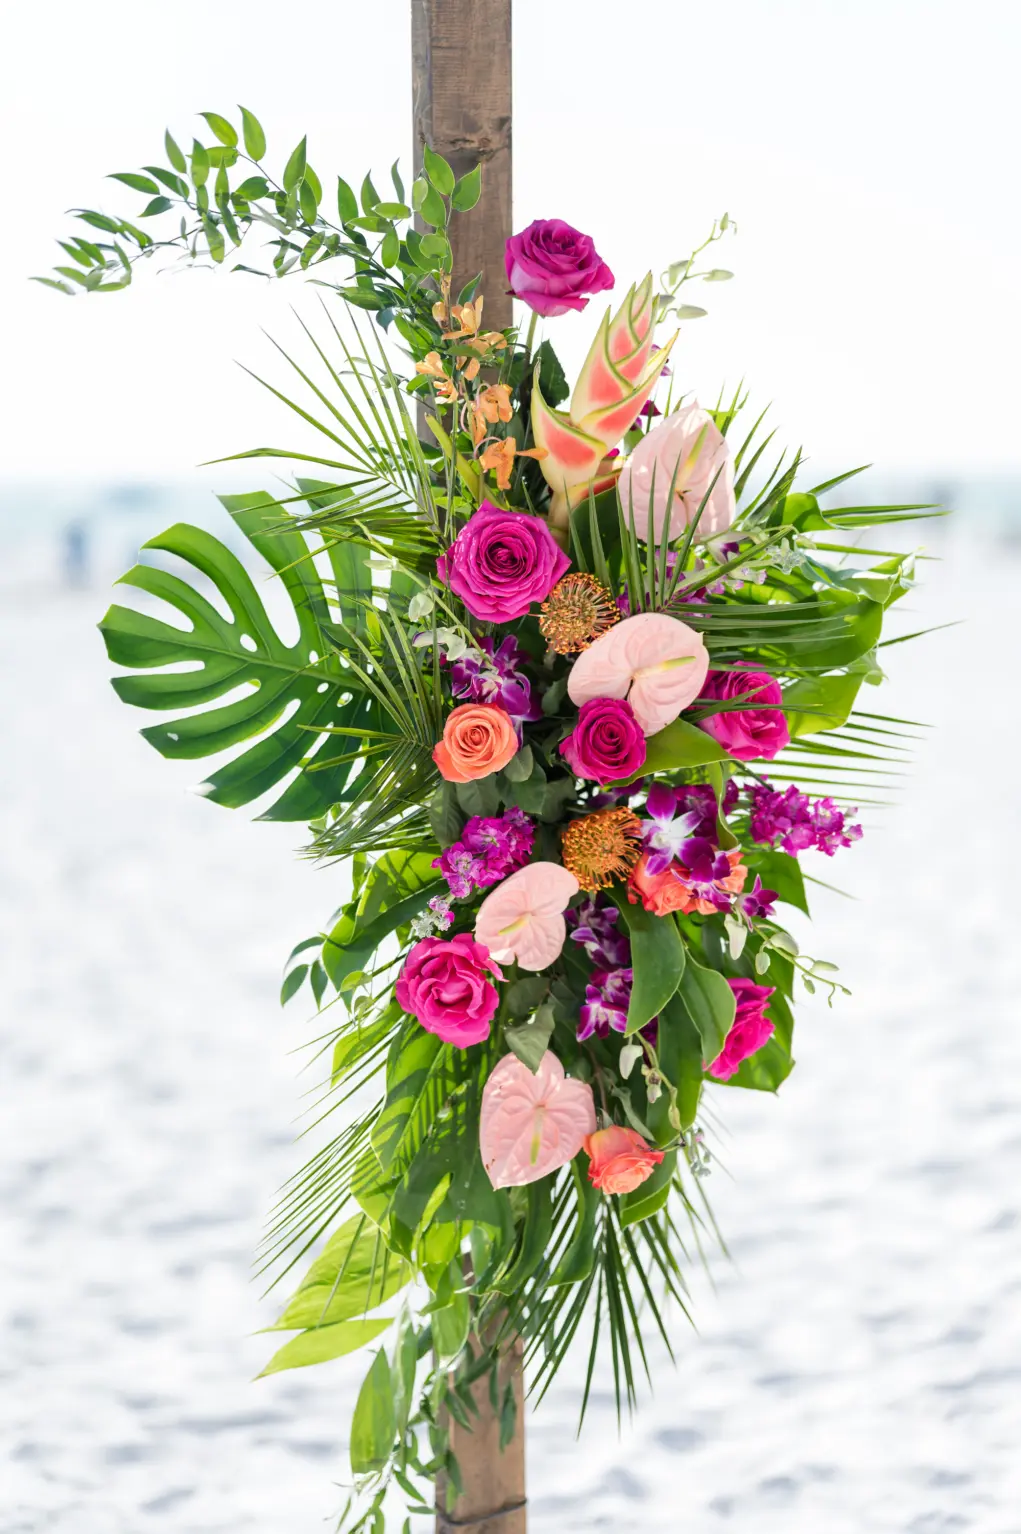 Wooden Tropical Inspired Ceremony Arch with Monstera Leaves and Pink and Orange Florals Ideas | Sarasota Florist Save the Date Florida